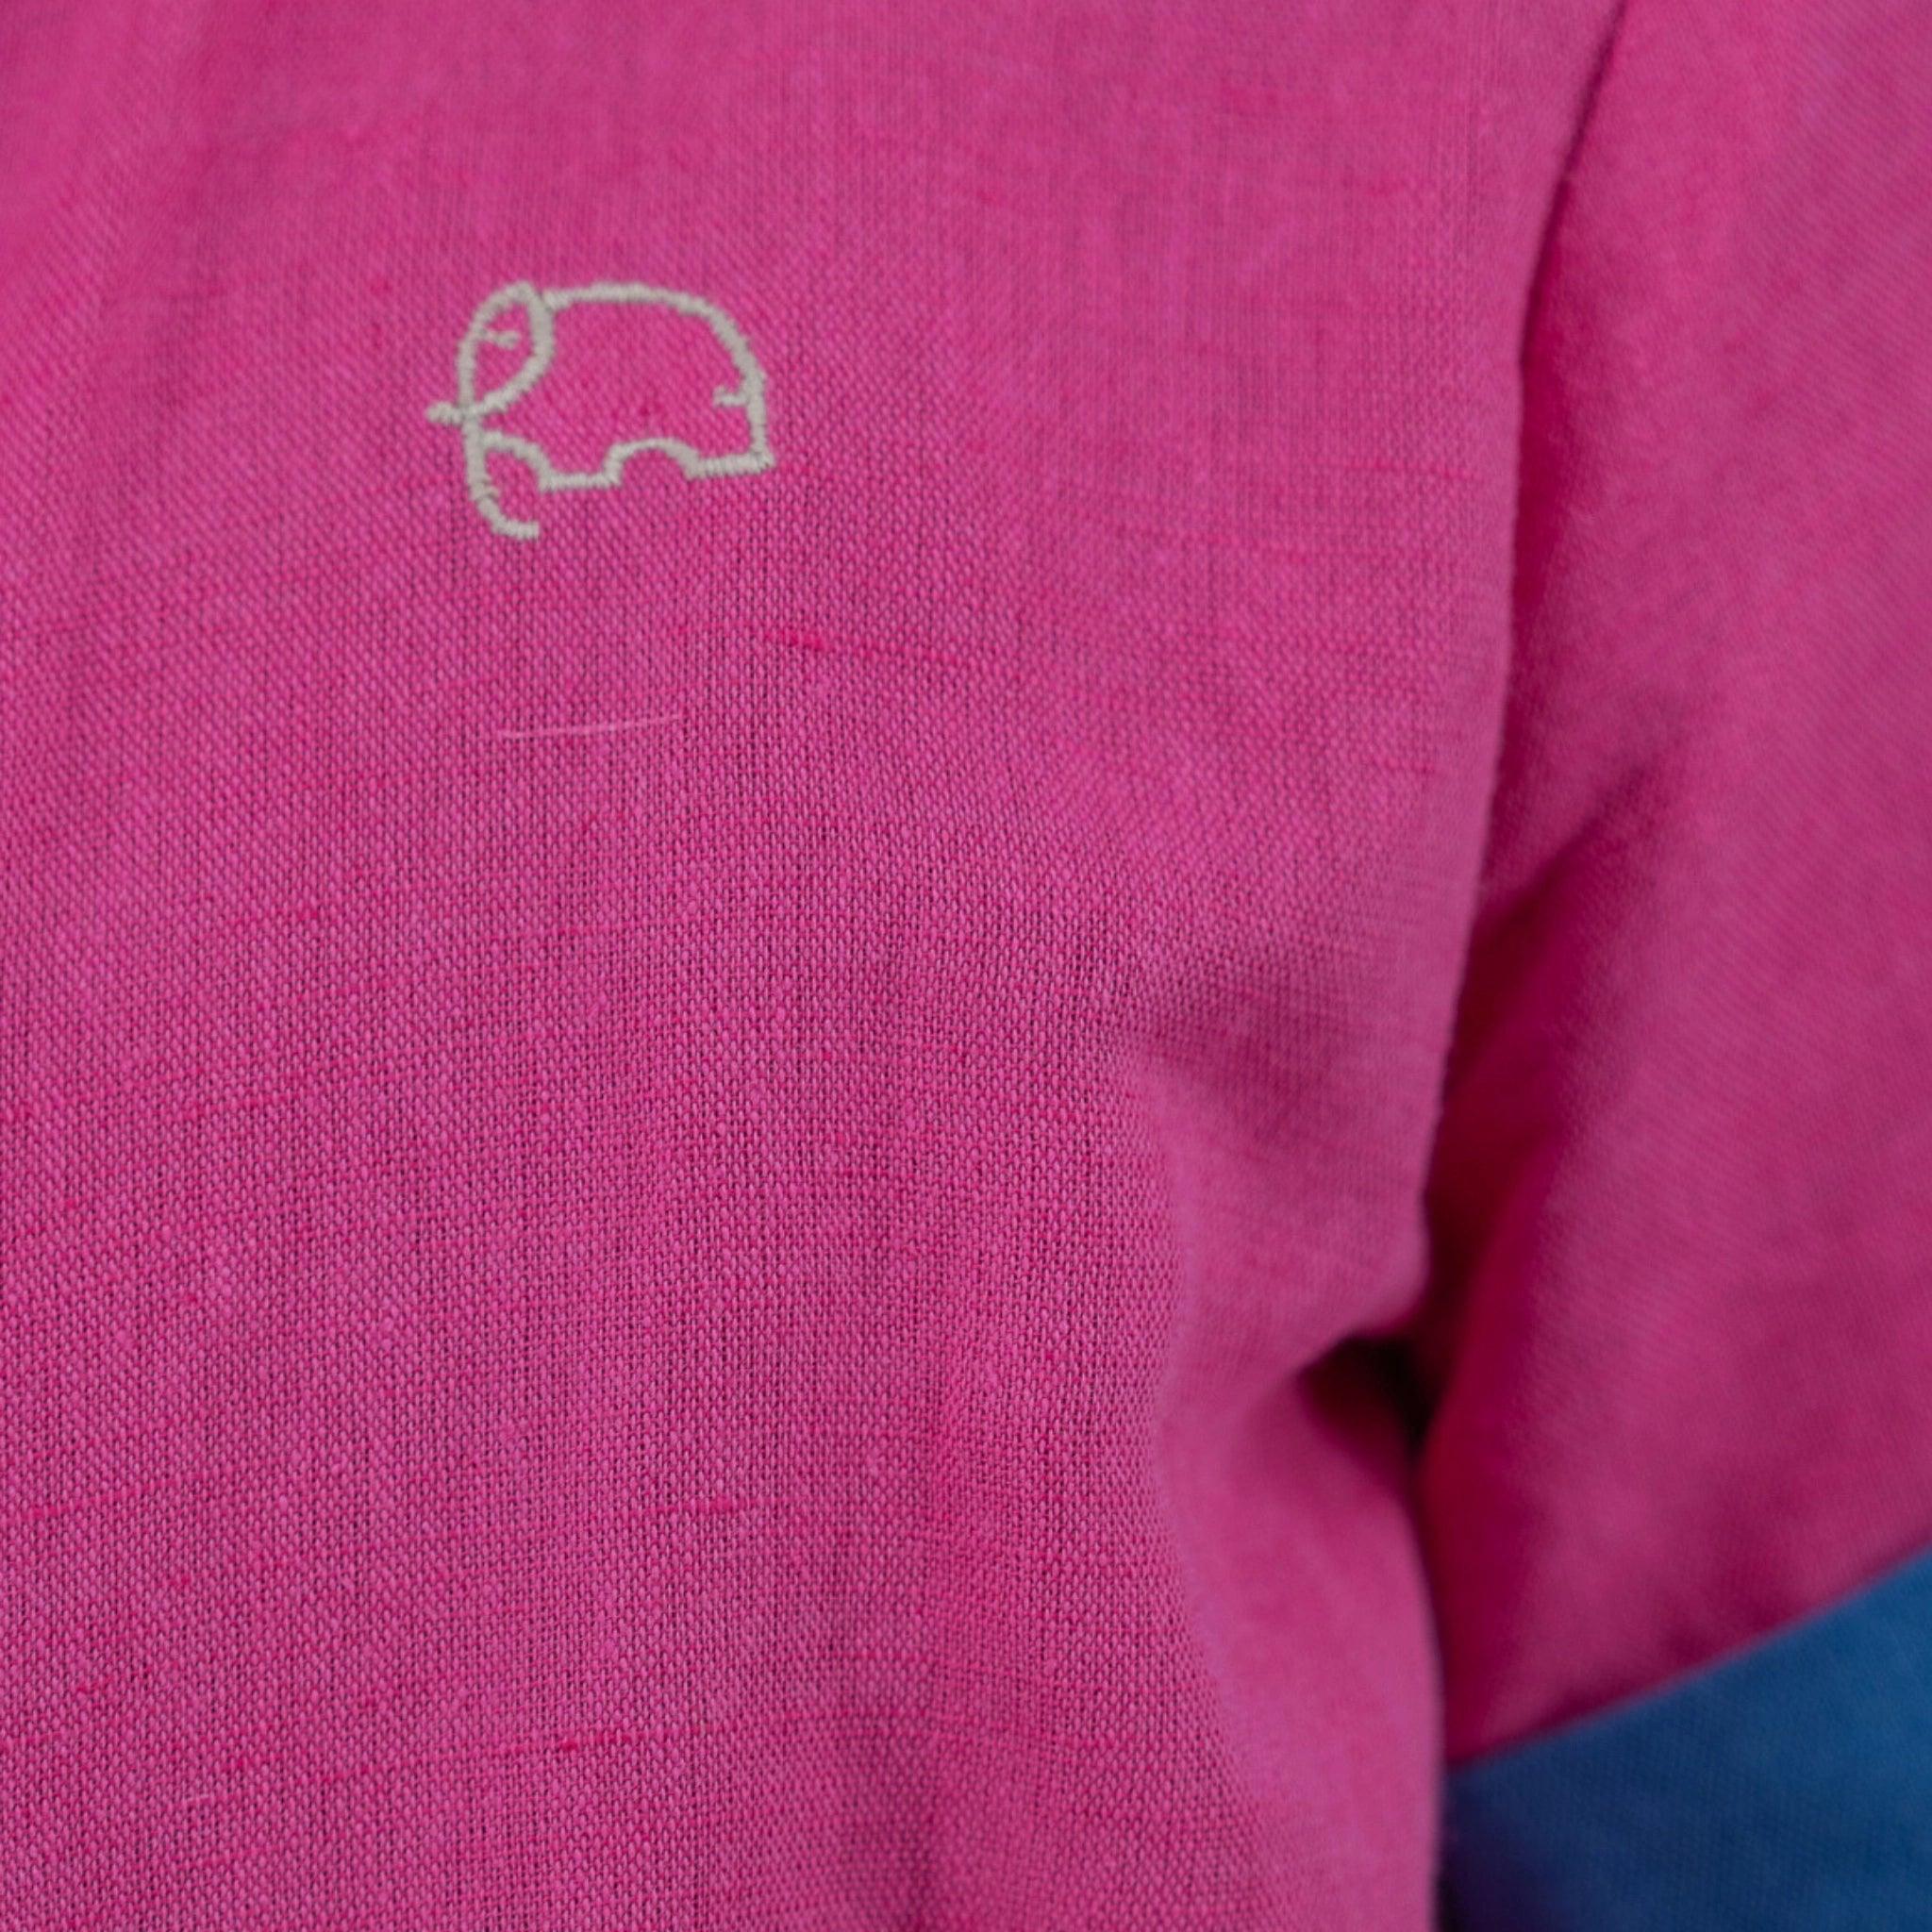 Close-up of a Karee fuchsia purple linen dress for girls with a small white embroidered logo resembling a car on the left chest area.